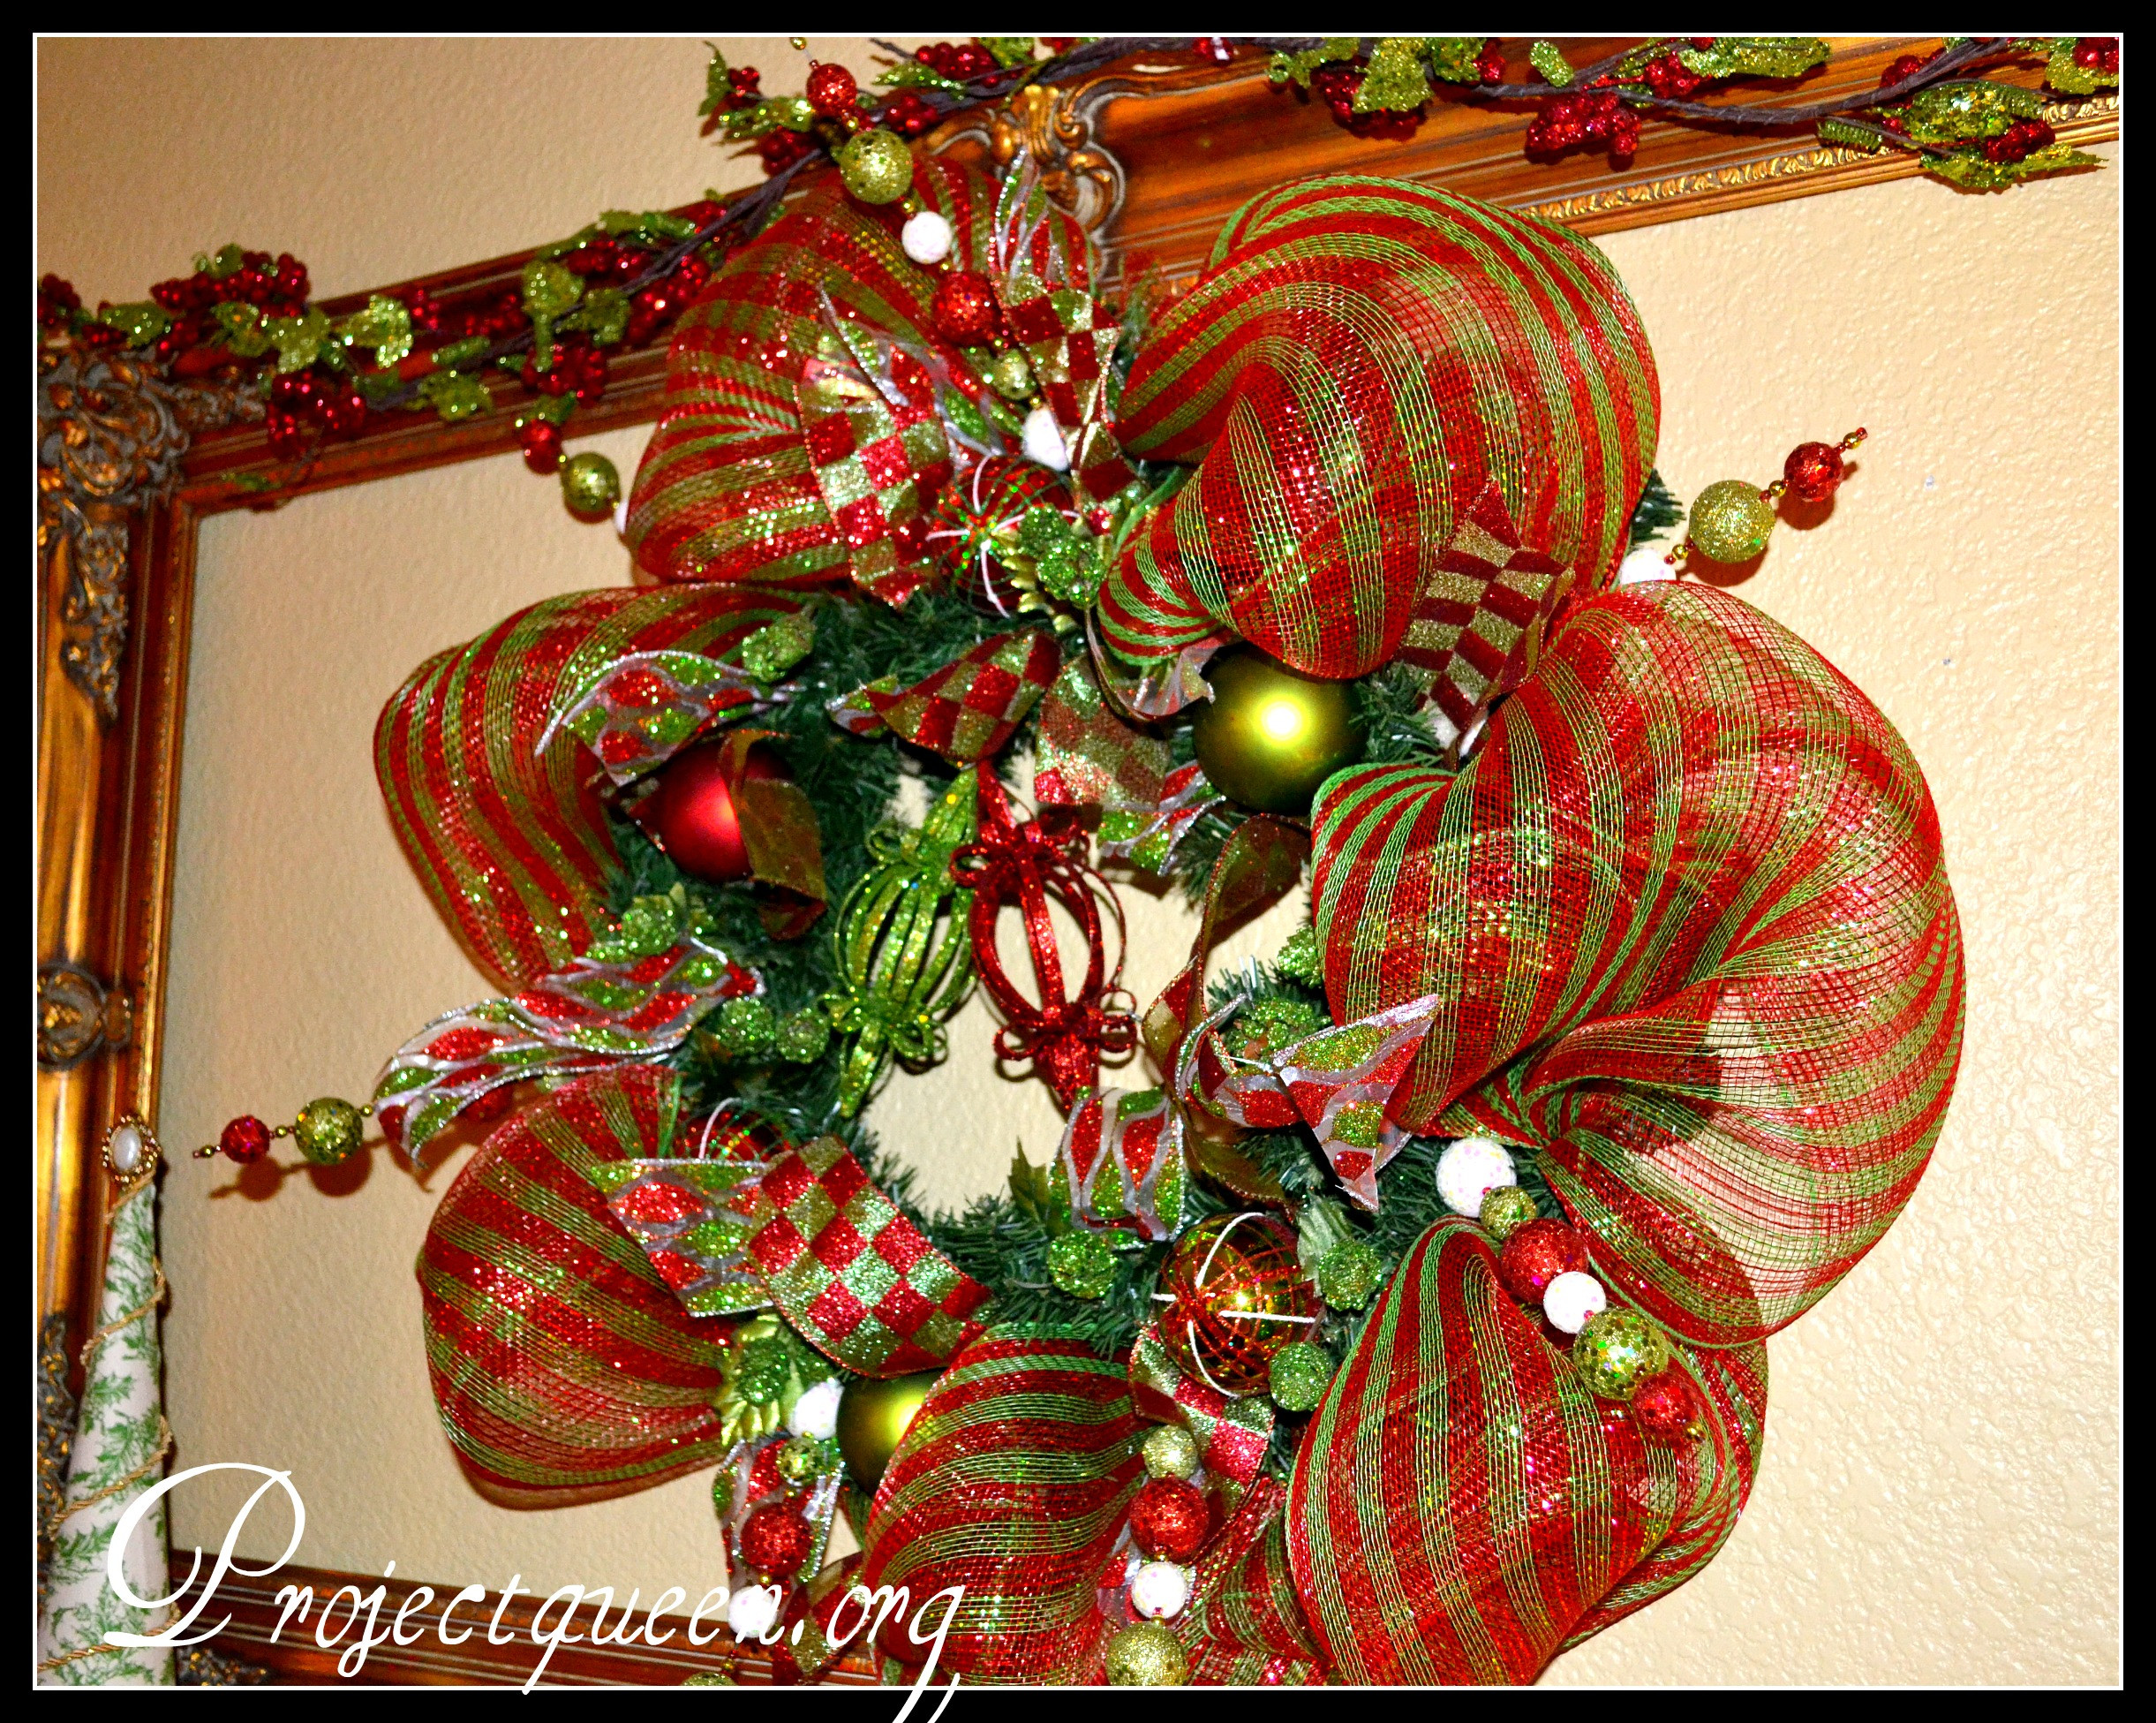 DIY Mesh Christmas Wreath
 Mesh Christmas Wreath Tutorial Re posted from last year